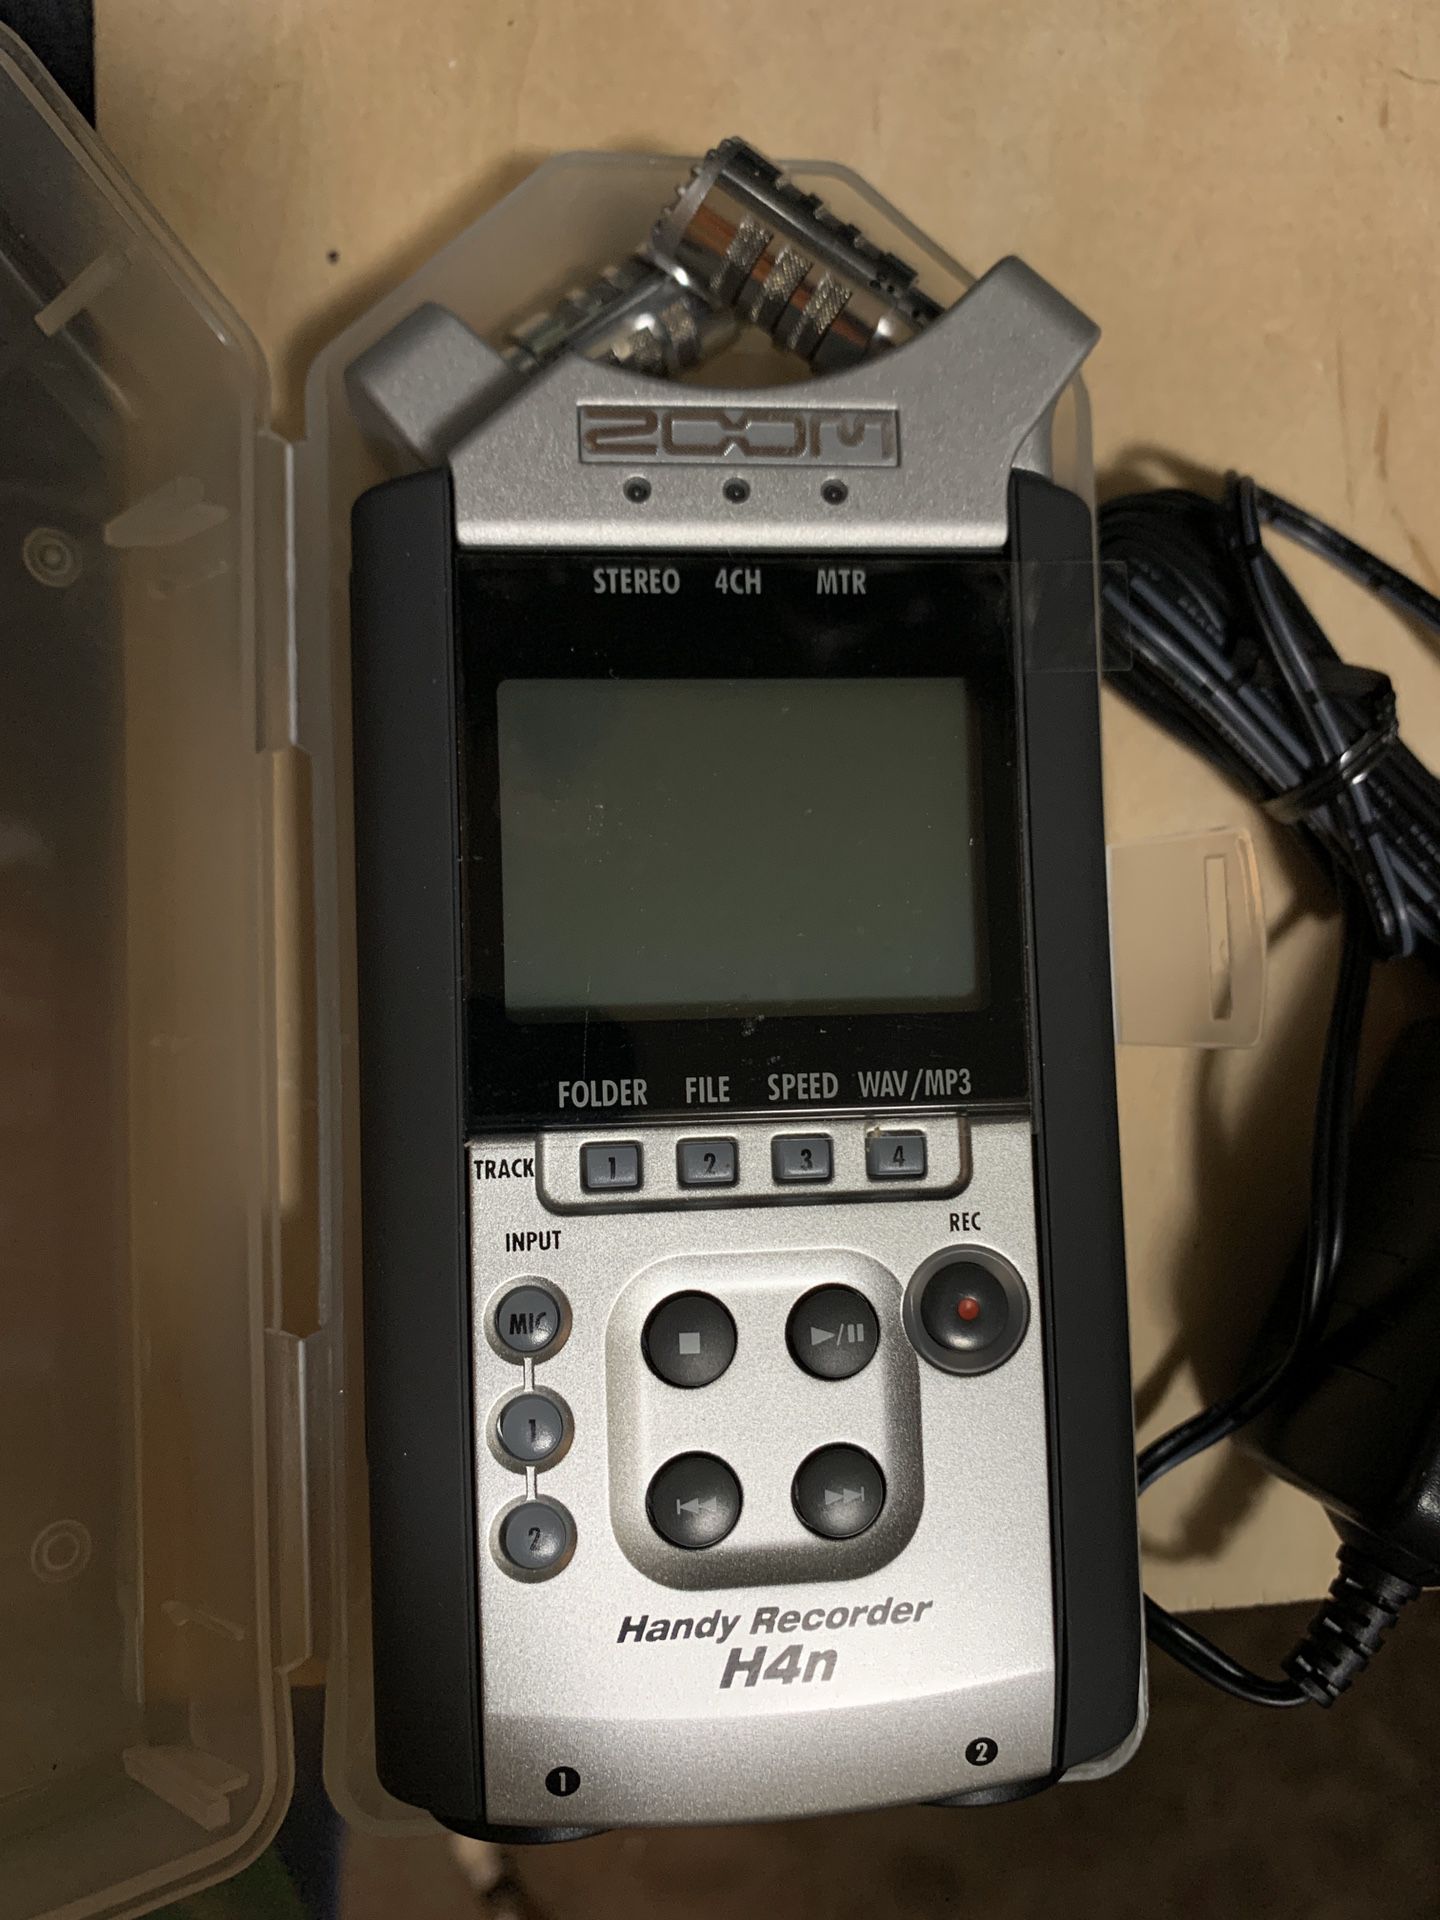 Zoom H4n audio recorder with accessories